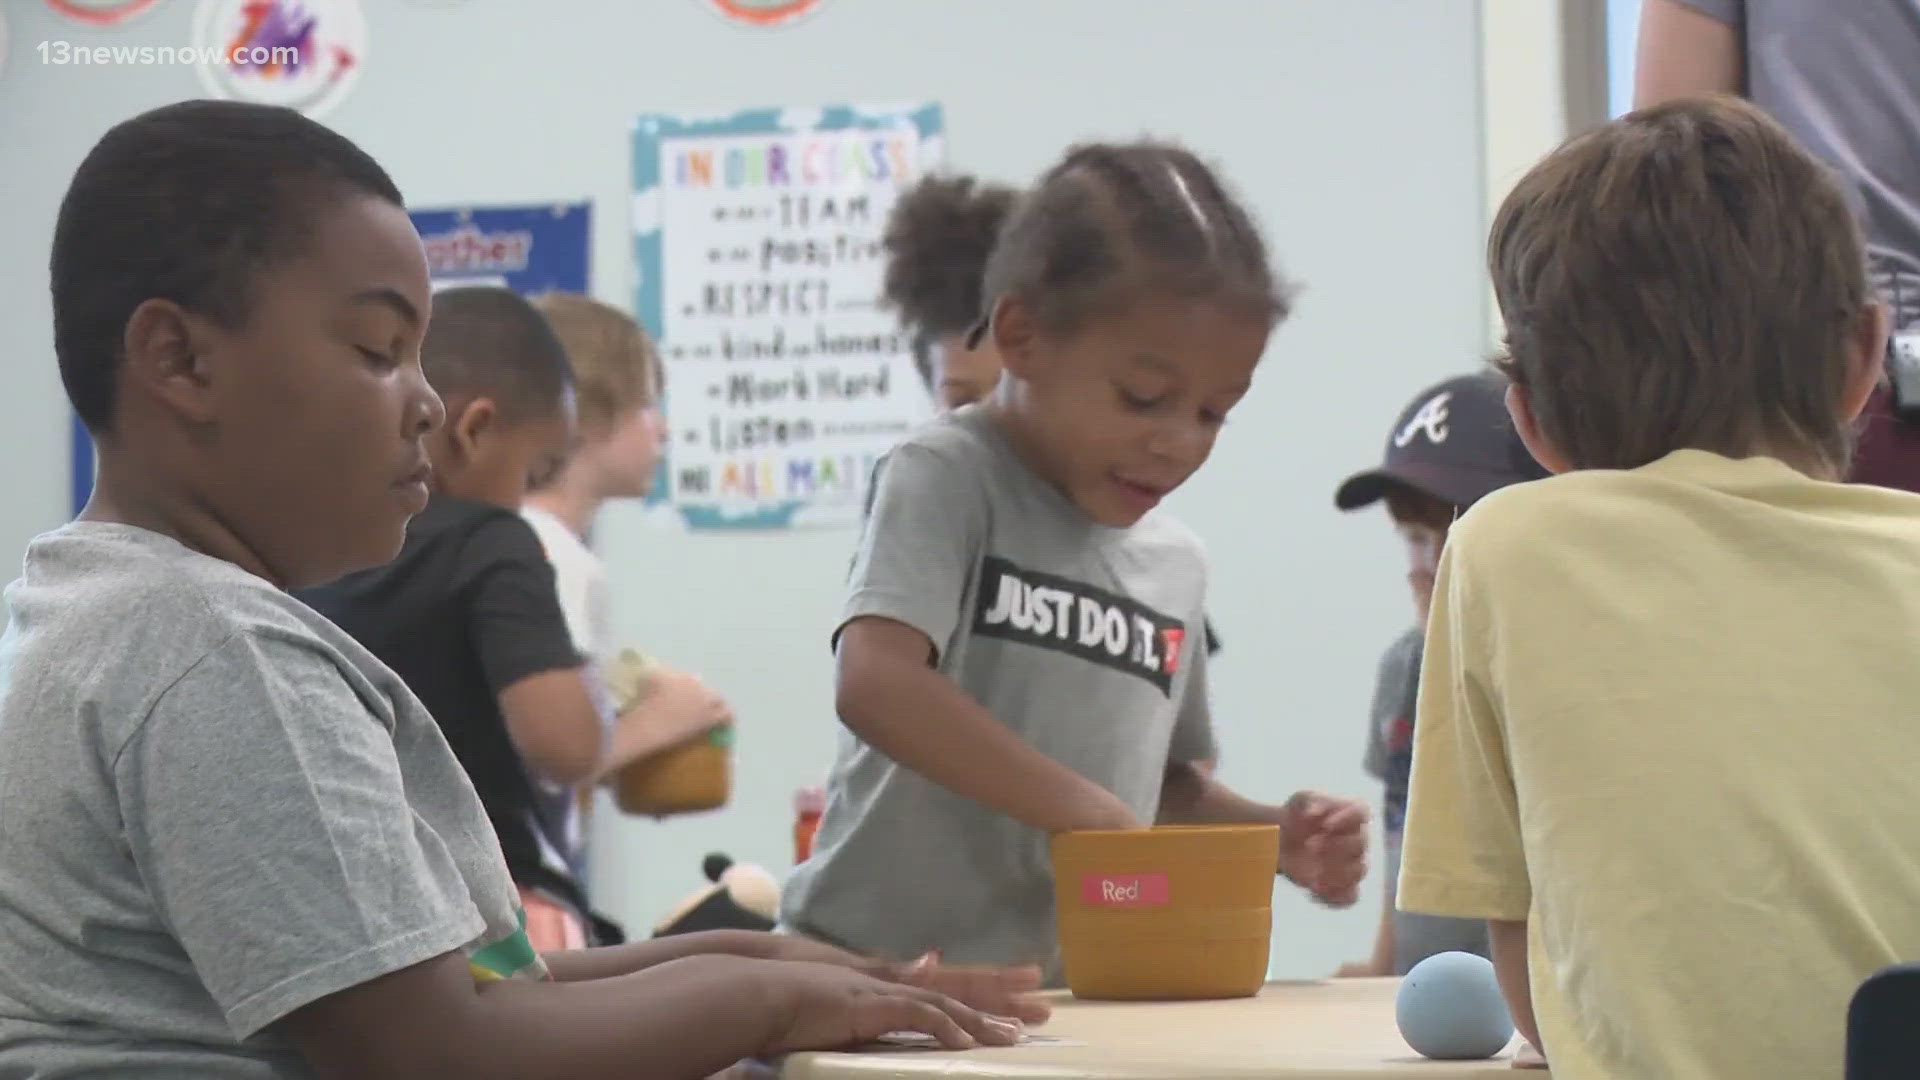 Tidewater Collegiate Academy customizes learning for homeschooled students. The institution is meeting kids where they are and preparing them to impact the world.